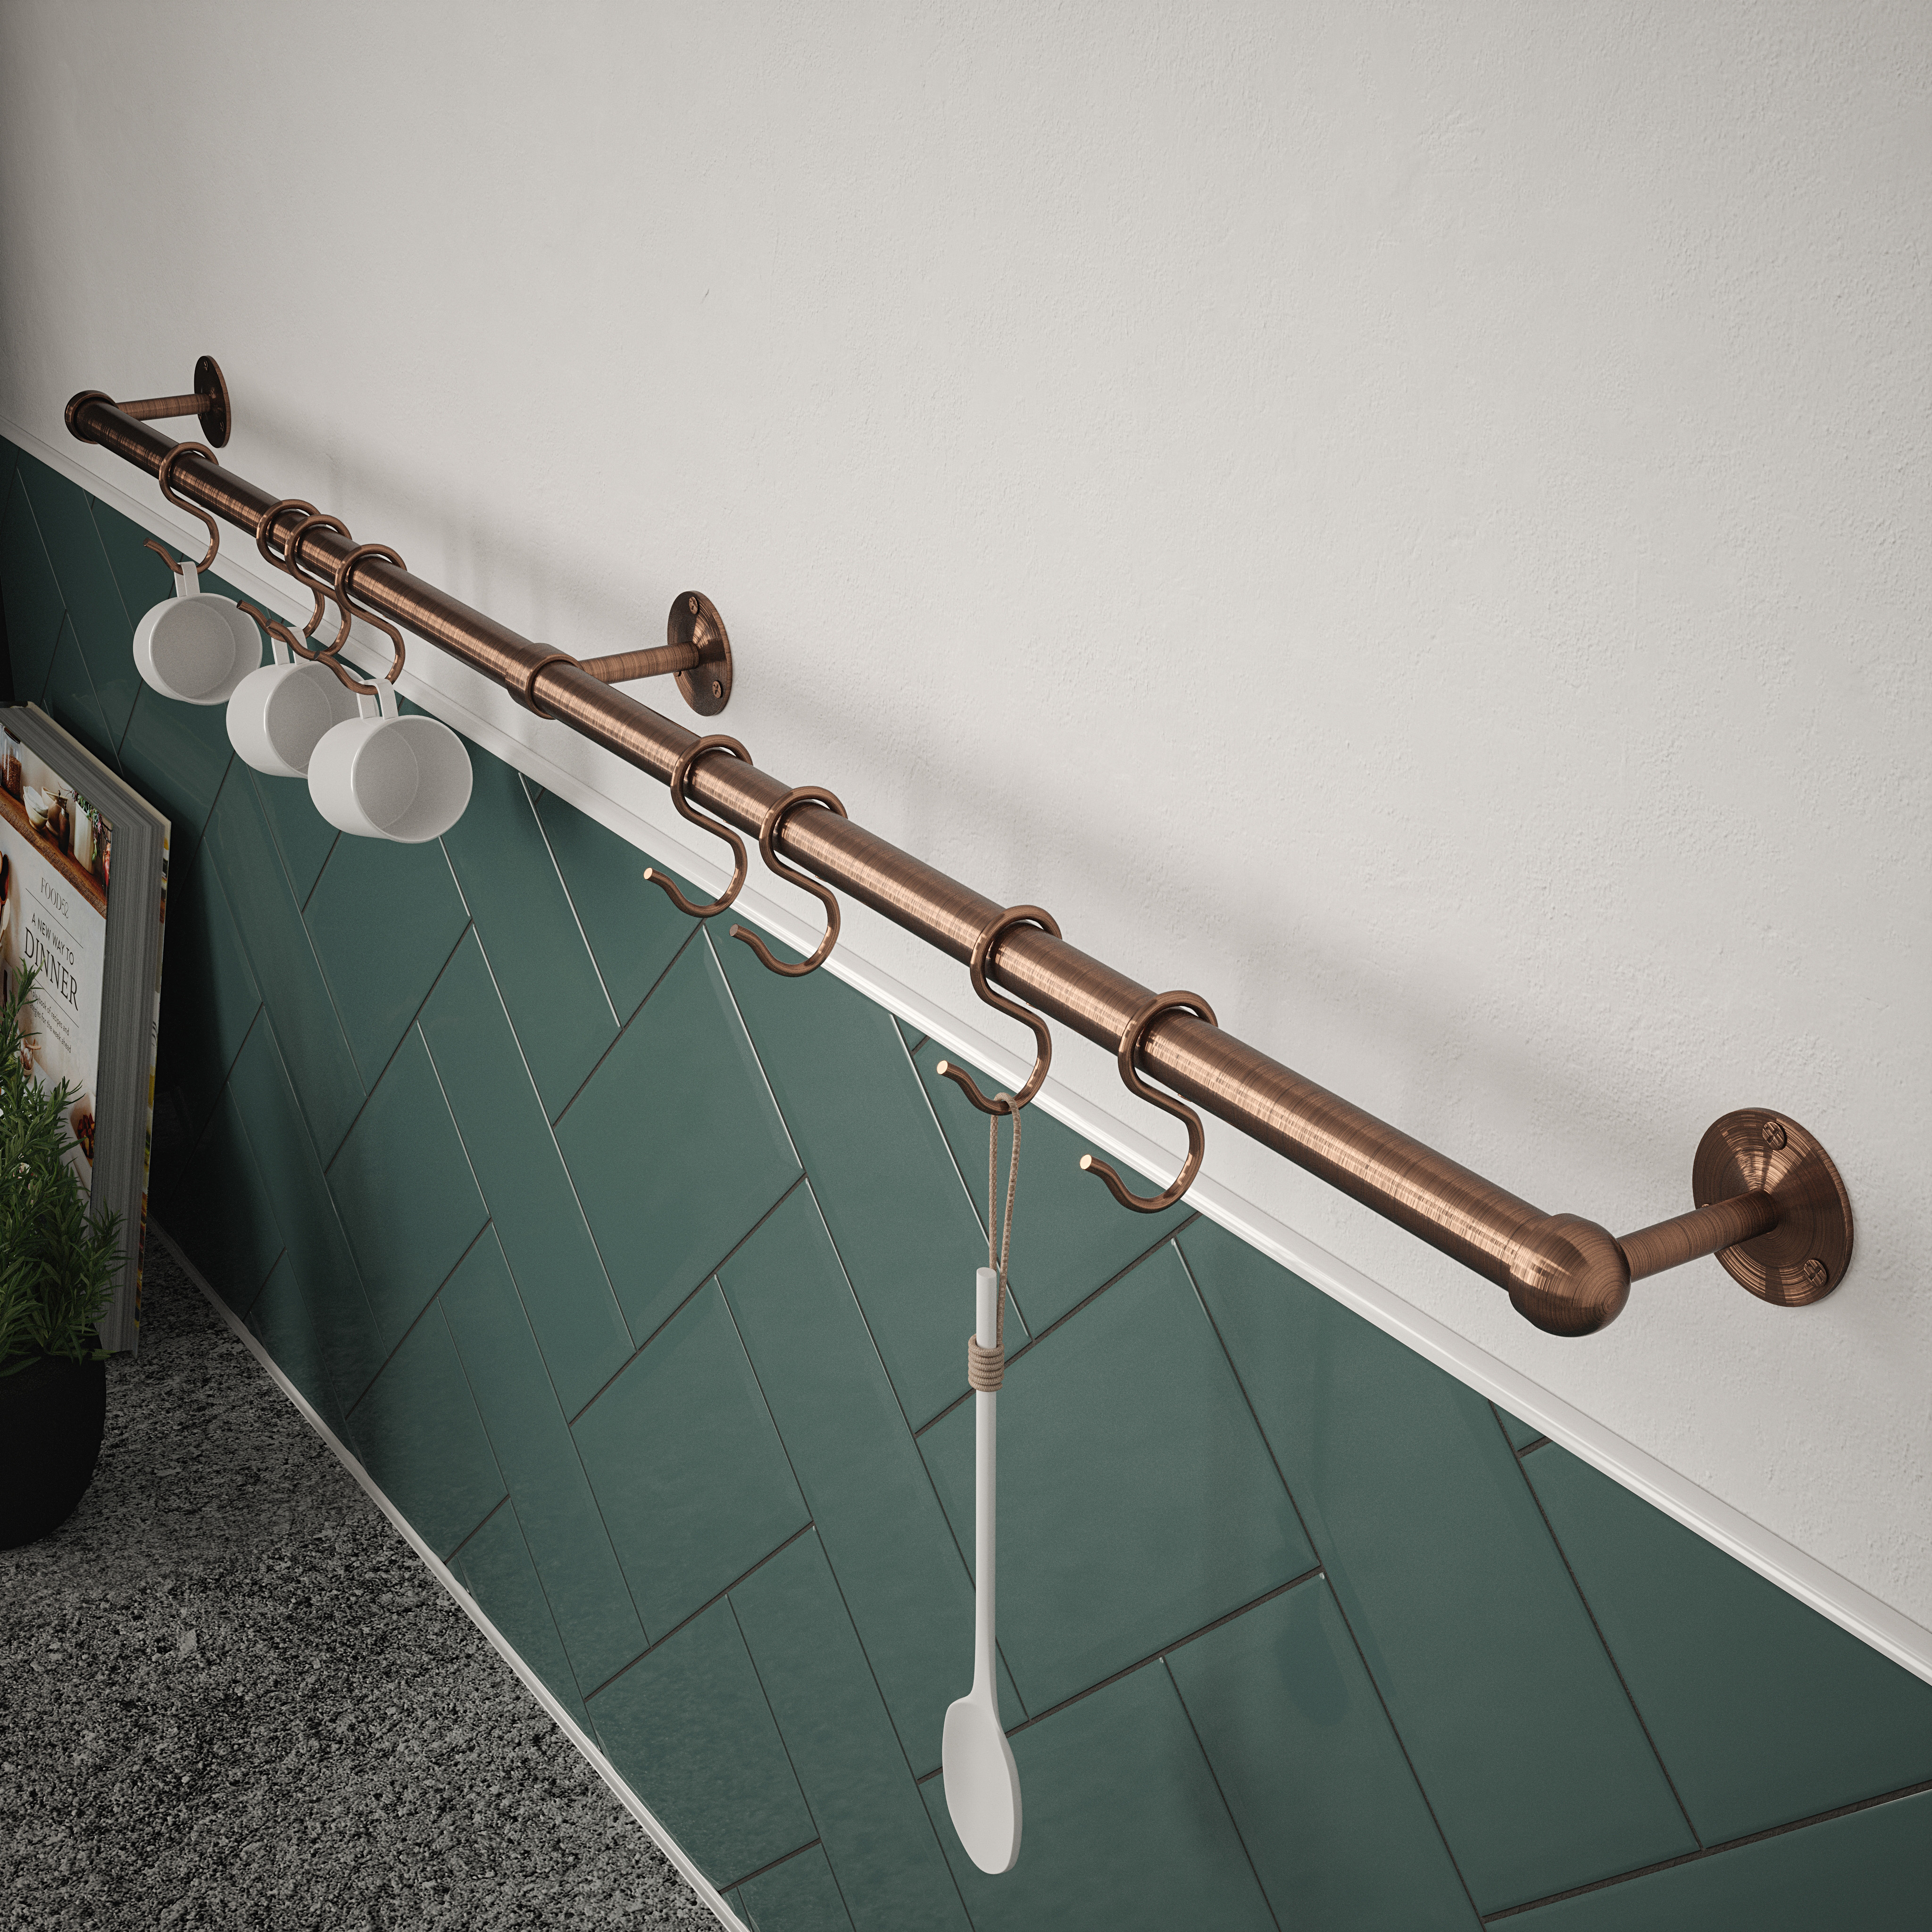 Image of Rothley Utensil Rail Kit, in Antique Brass and Copper, Stainless Steel, Size: 19x1000mm